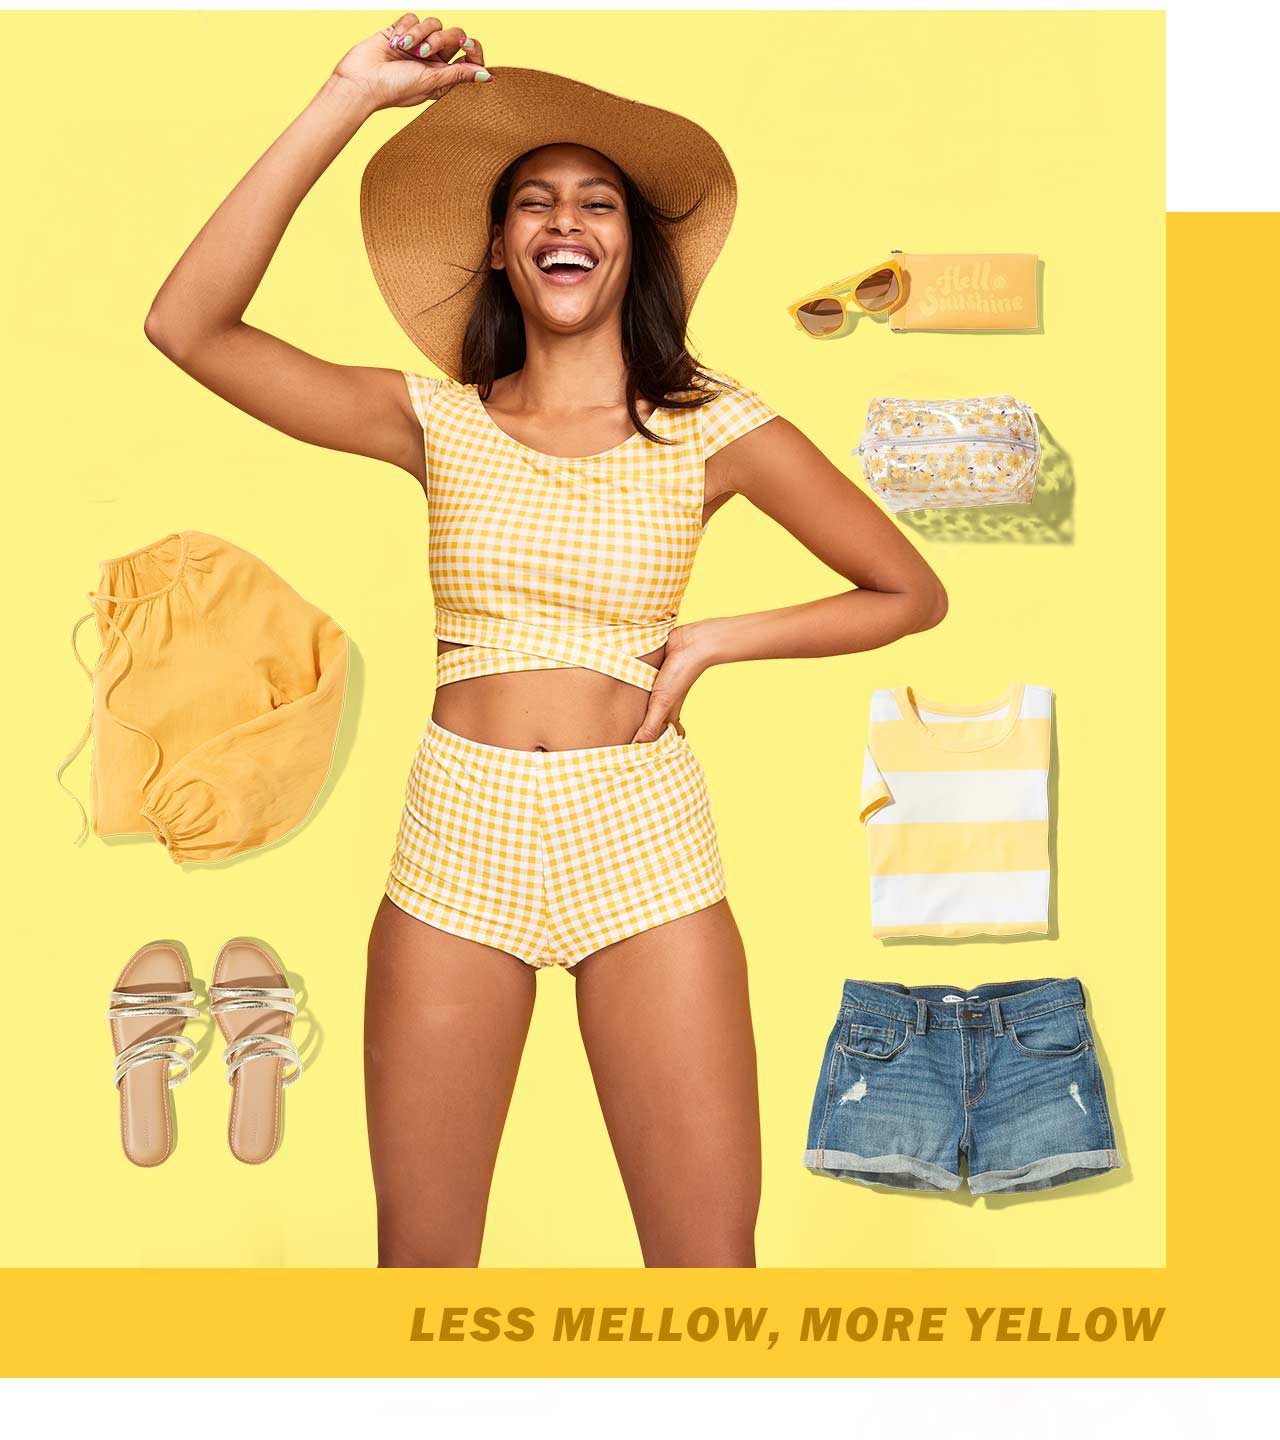 LESS MELLOW, MORE YELLOW